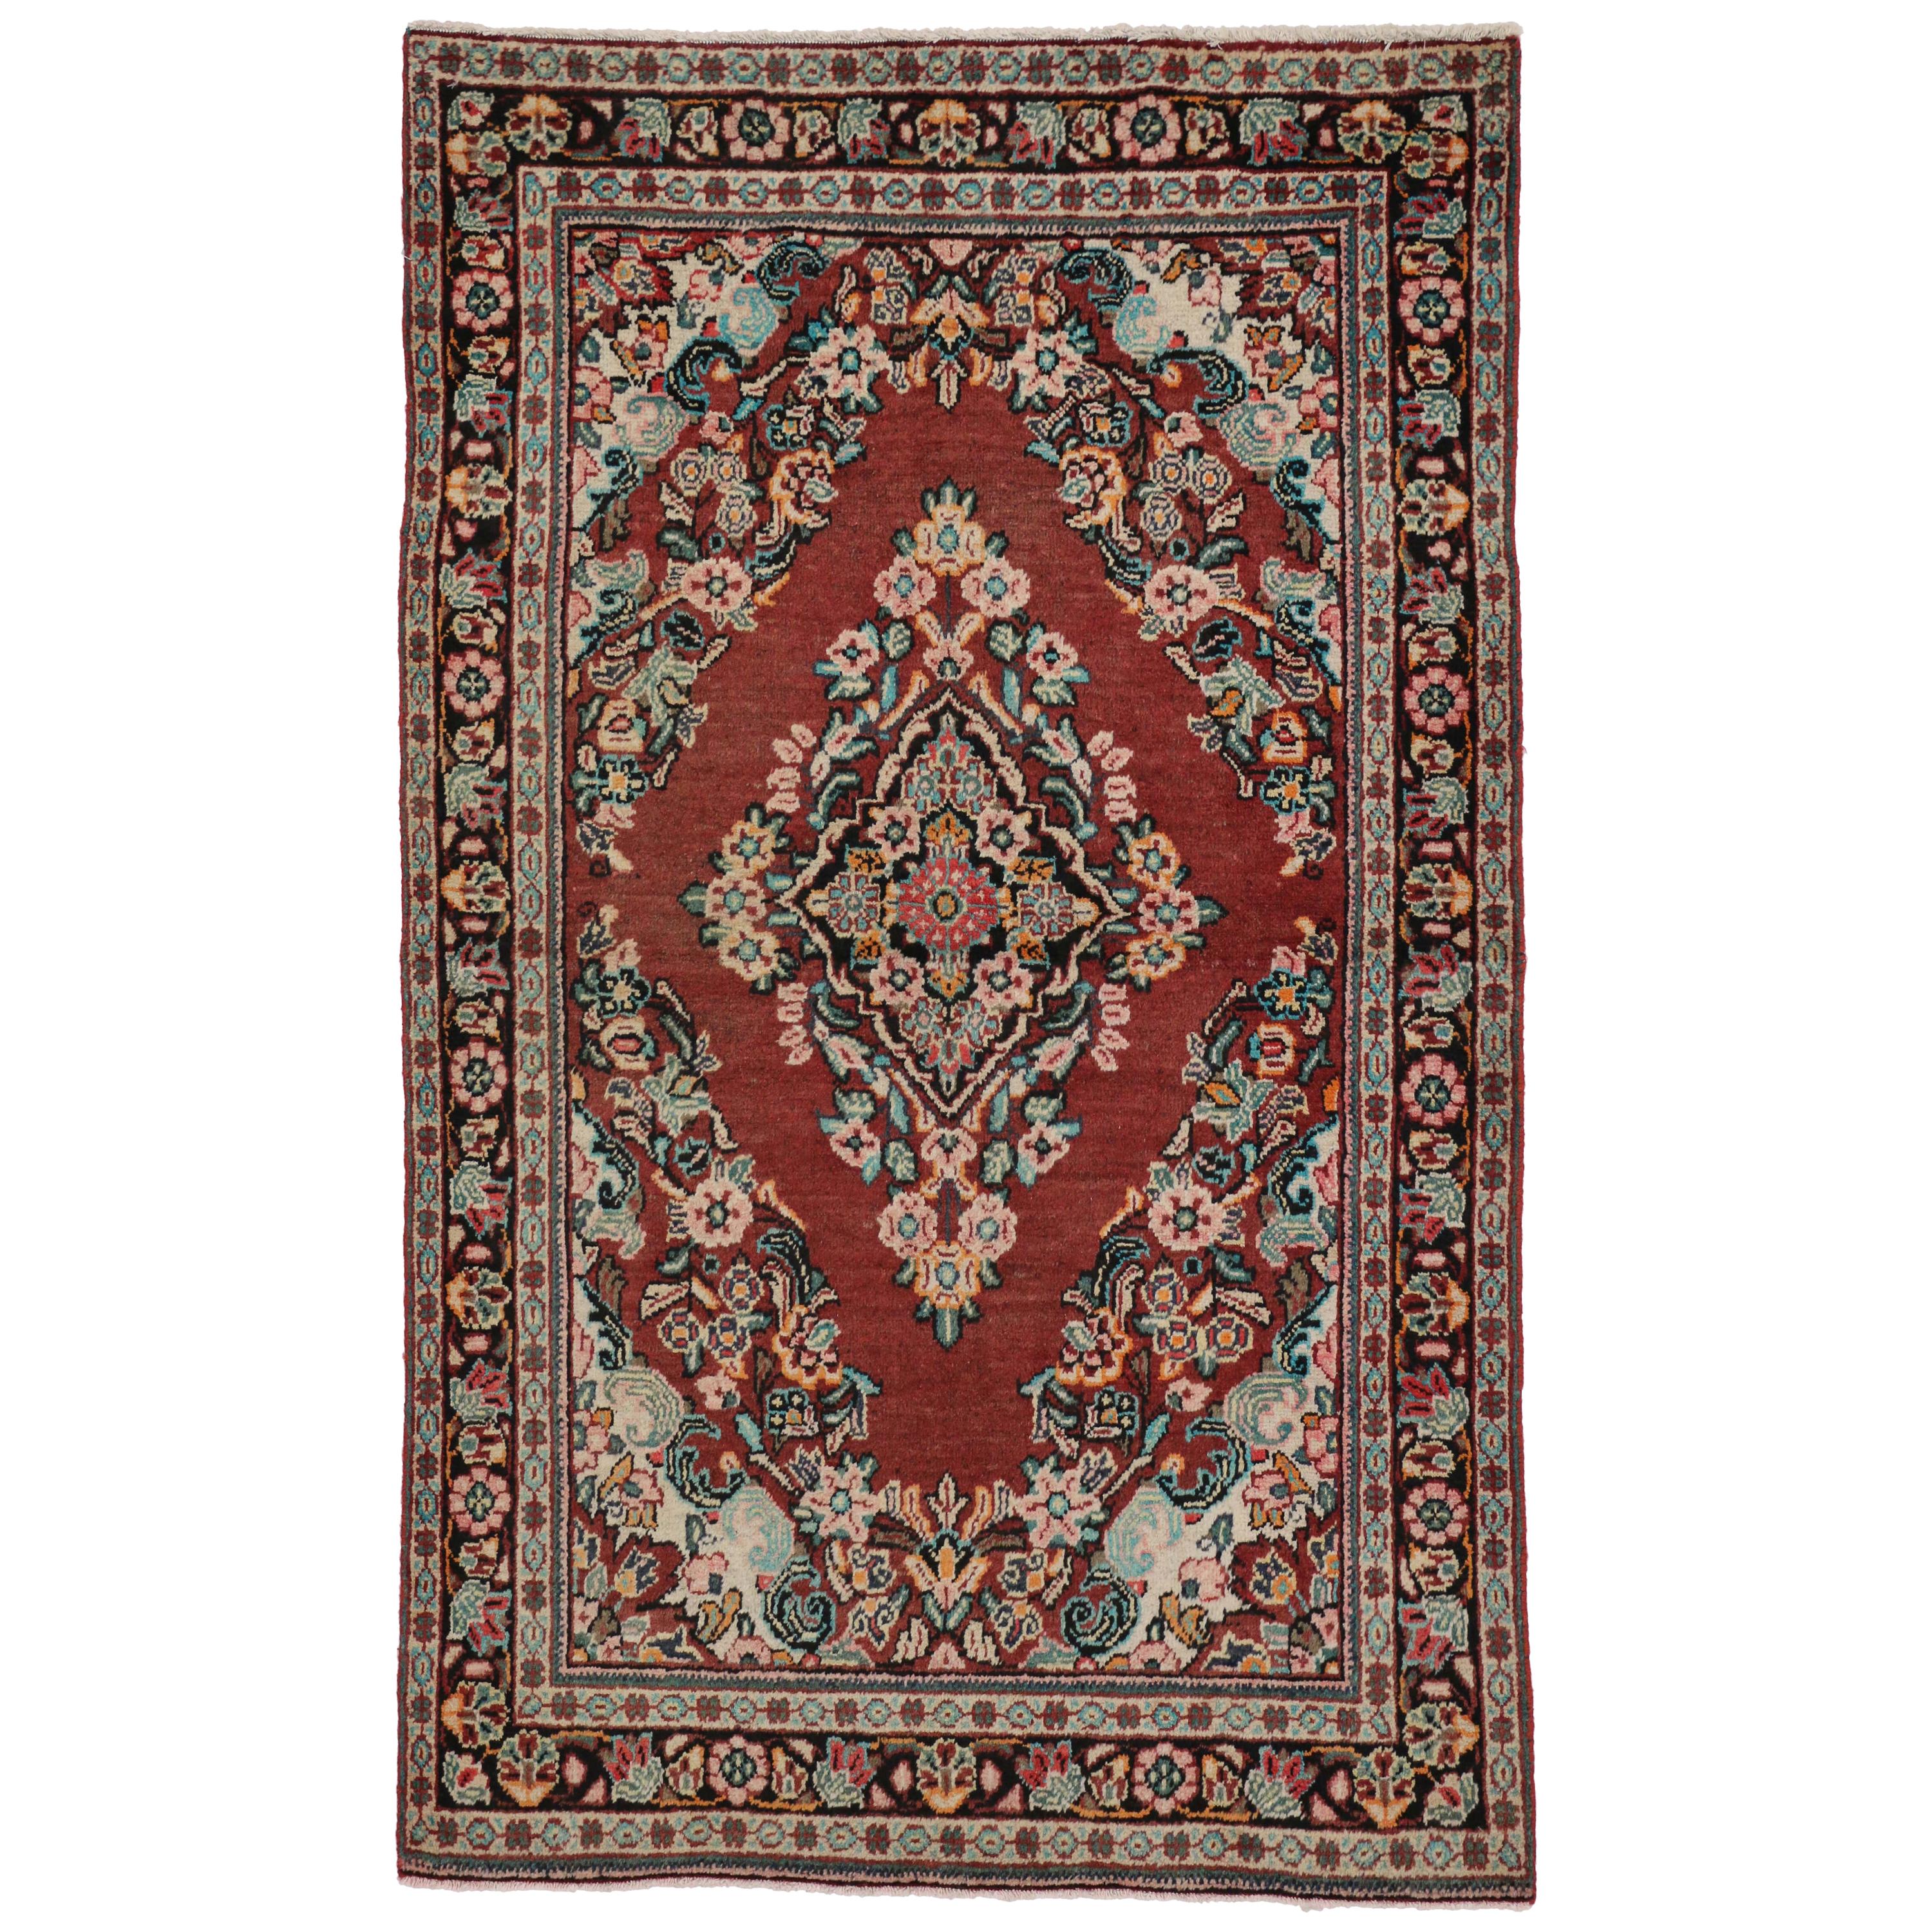 Vintage Persian Mahal Rug with Rustic English Country Style